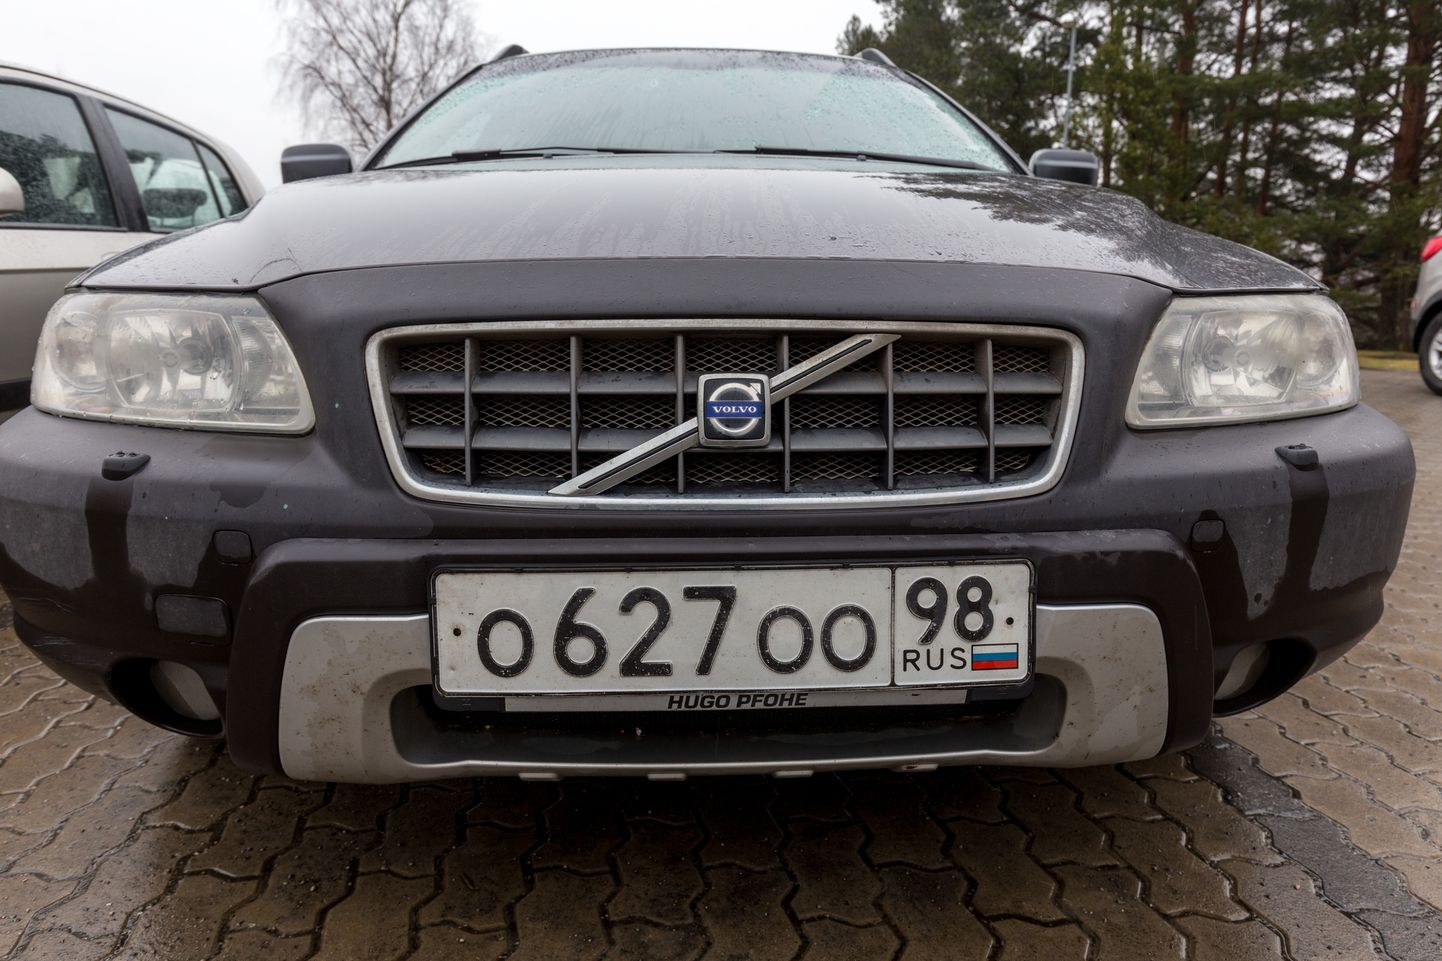 Owners of vehicles with Russian license plates have six months to register their vehicle in Estonia or take it out of country.